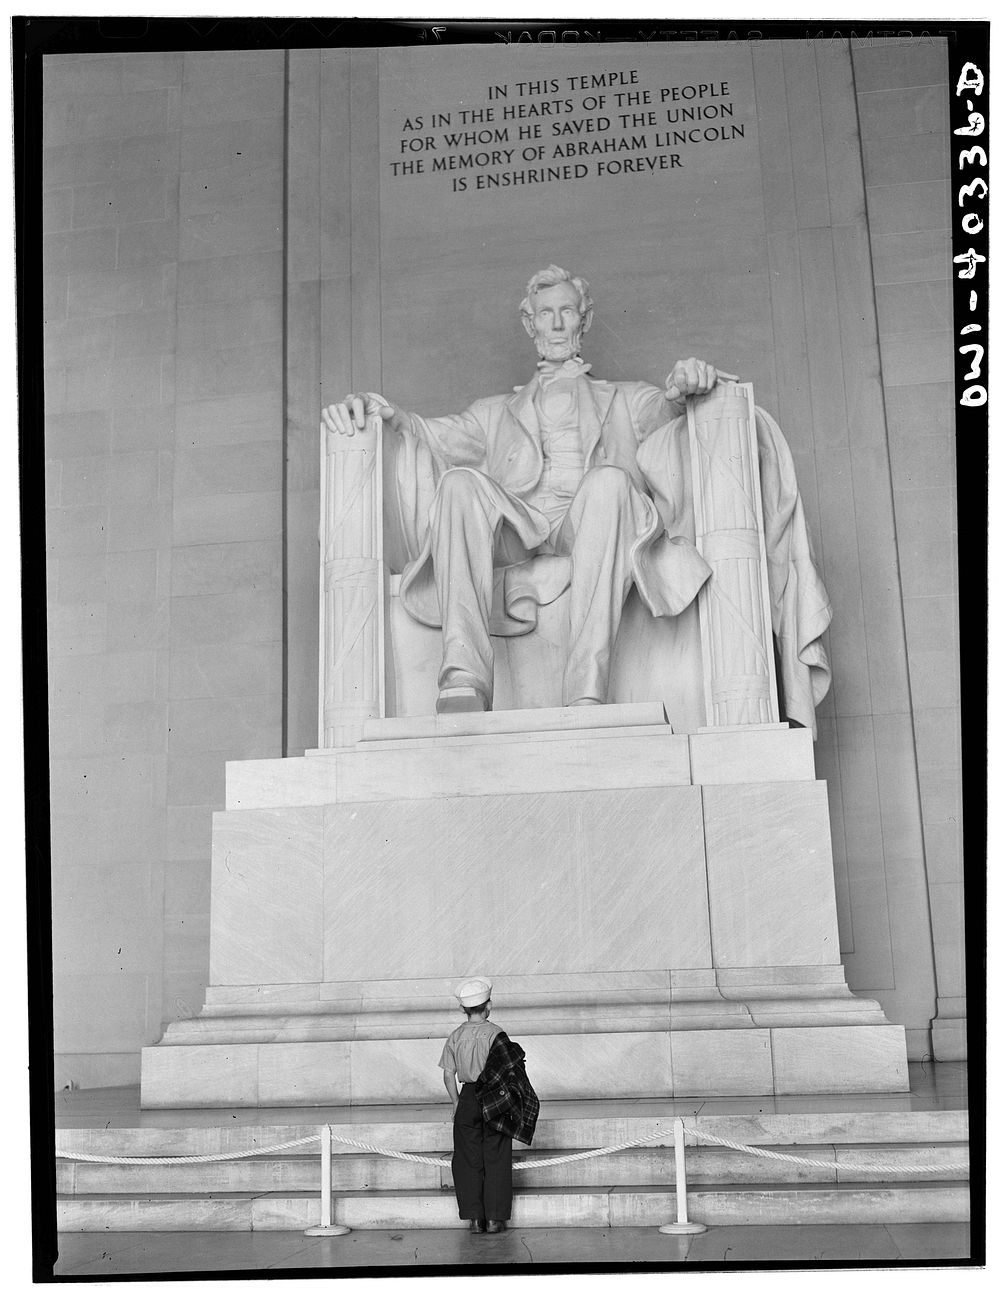 [Untitled photo, possibly related to: Washington, D.C. Inside the Lincoln memorial]. Sourced from the Library of Congress.